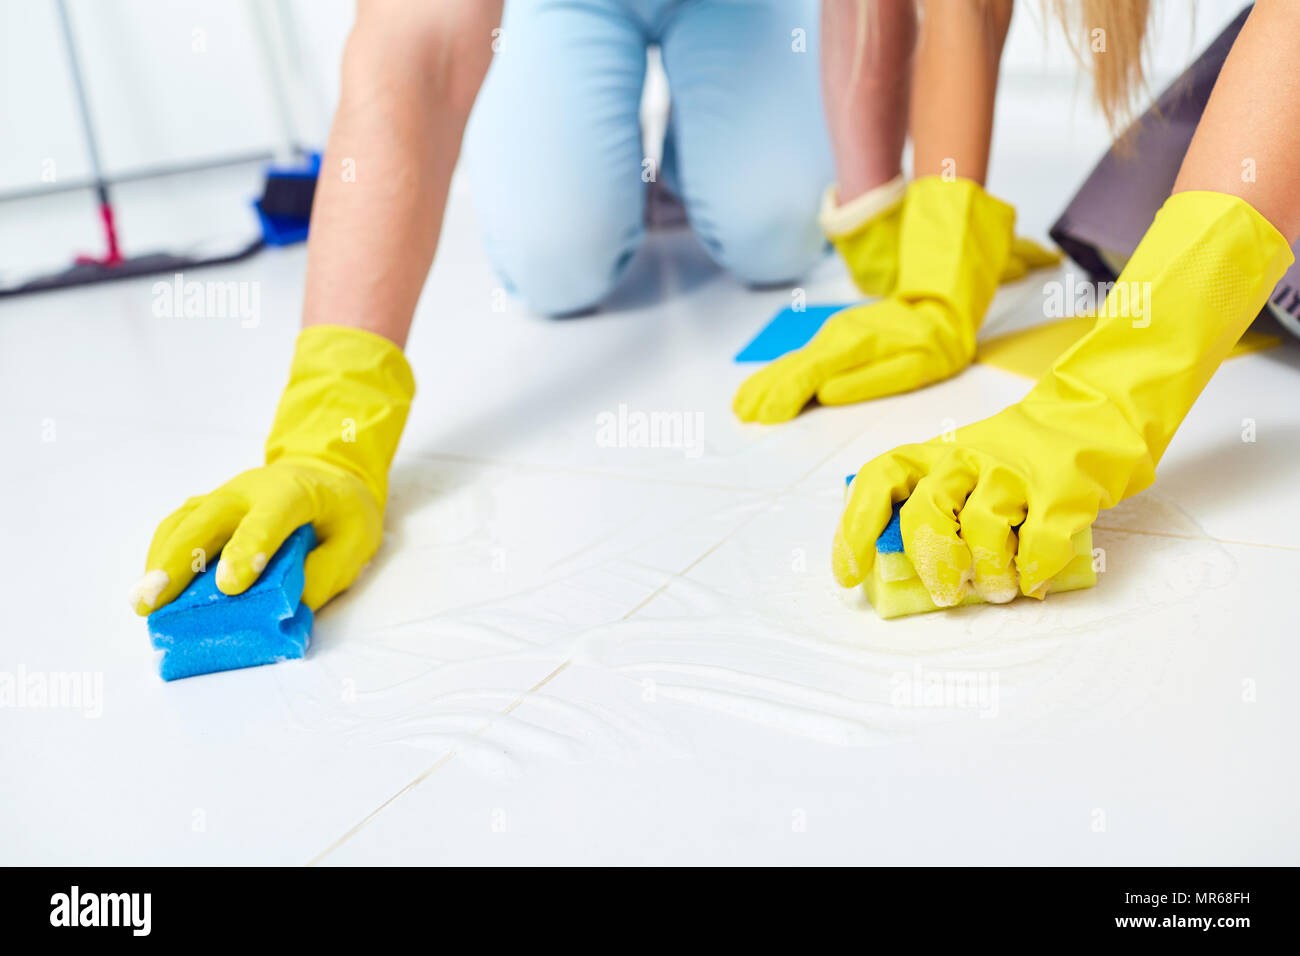 Cleaning, washing. A close-up of hands with gloves on cleaning. Stock Photo